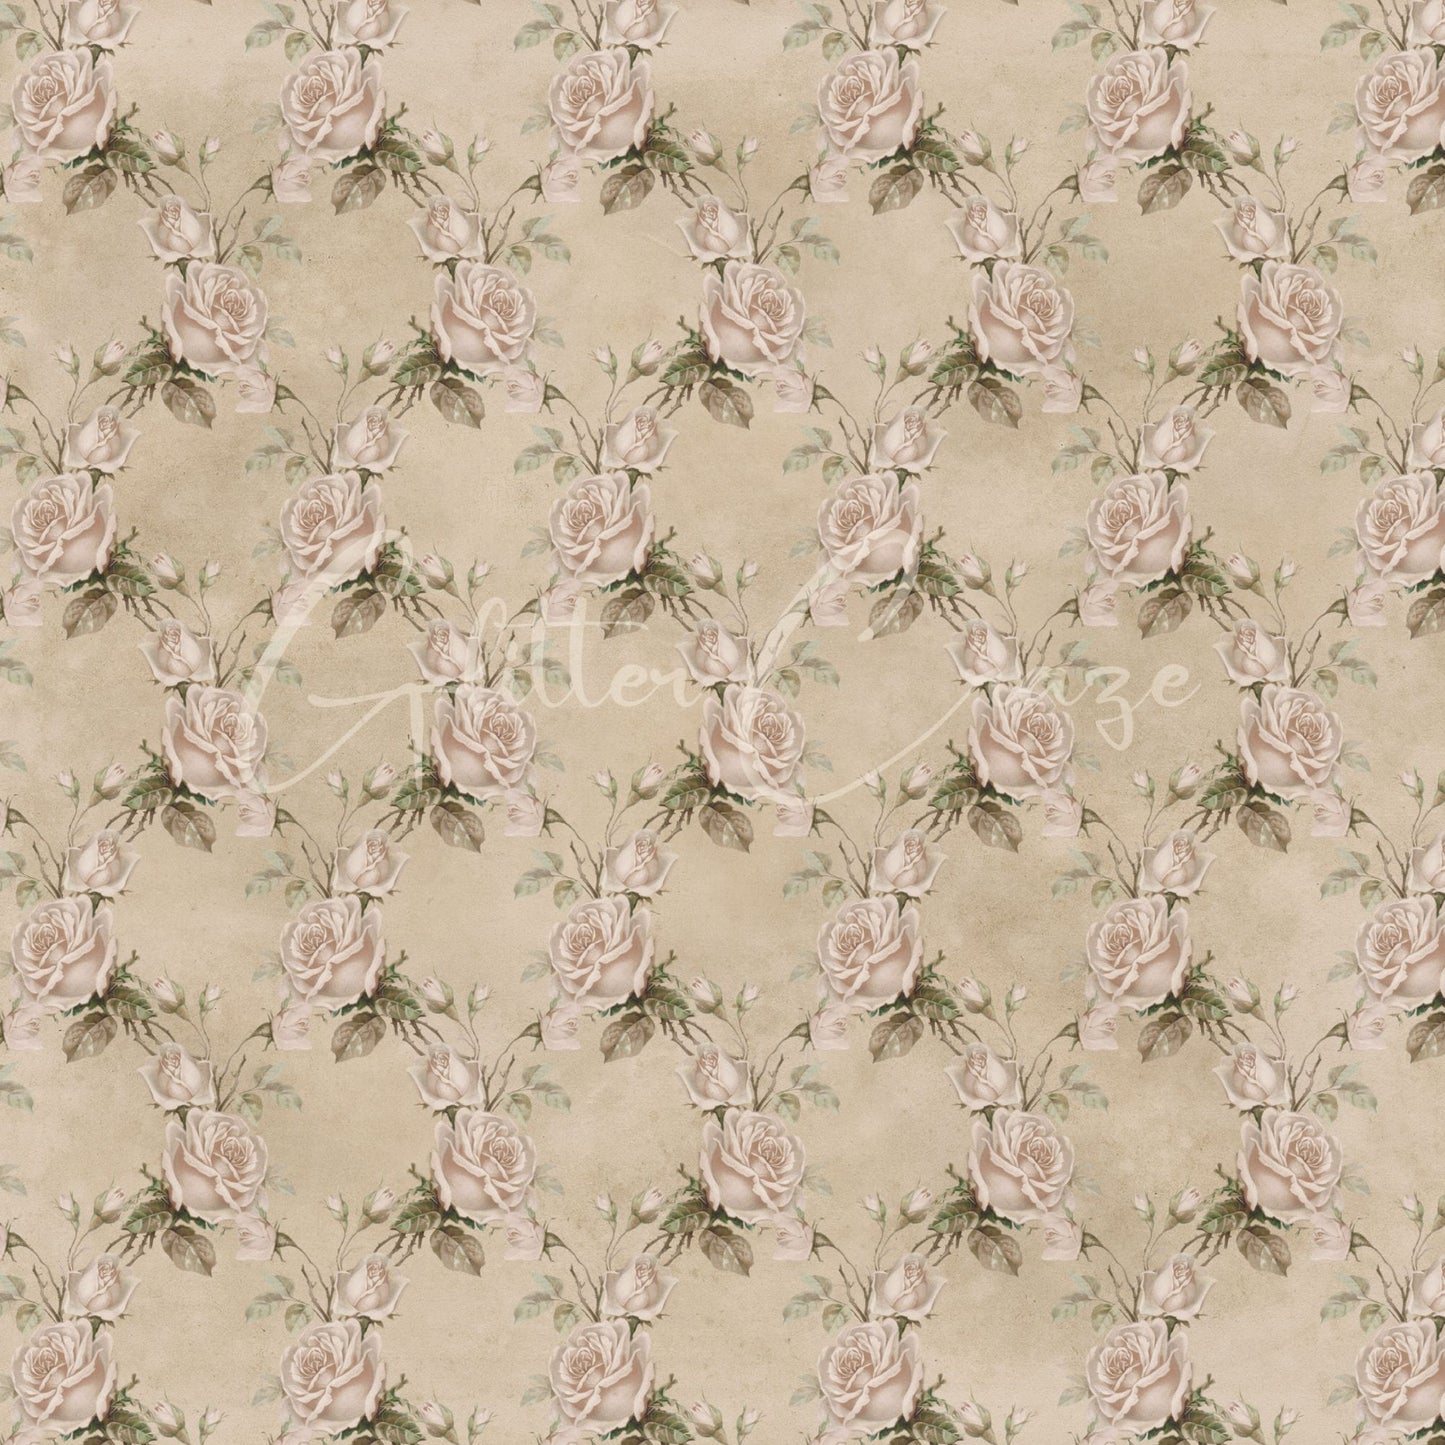 Vintage Brown Floral Collection 12x12 Vinyl sheets- 12 Designs available